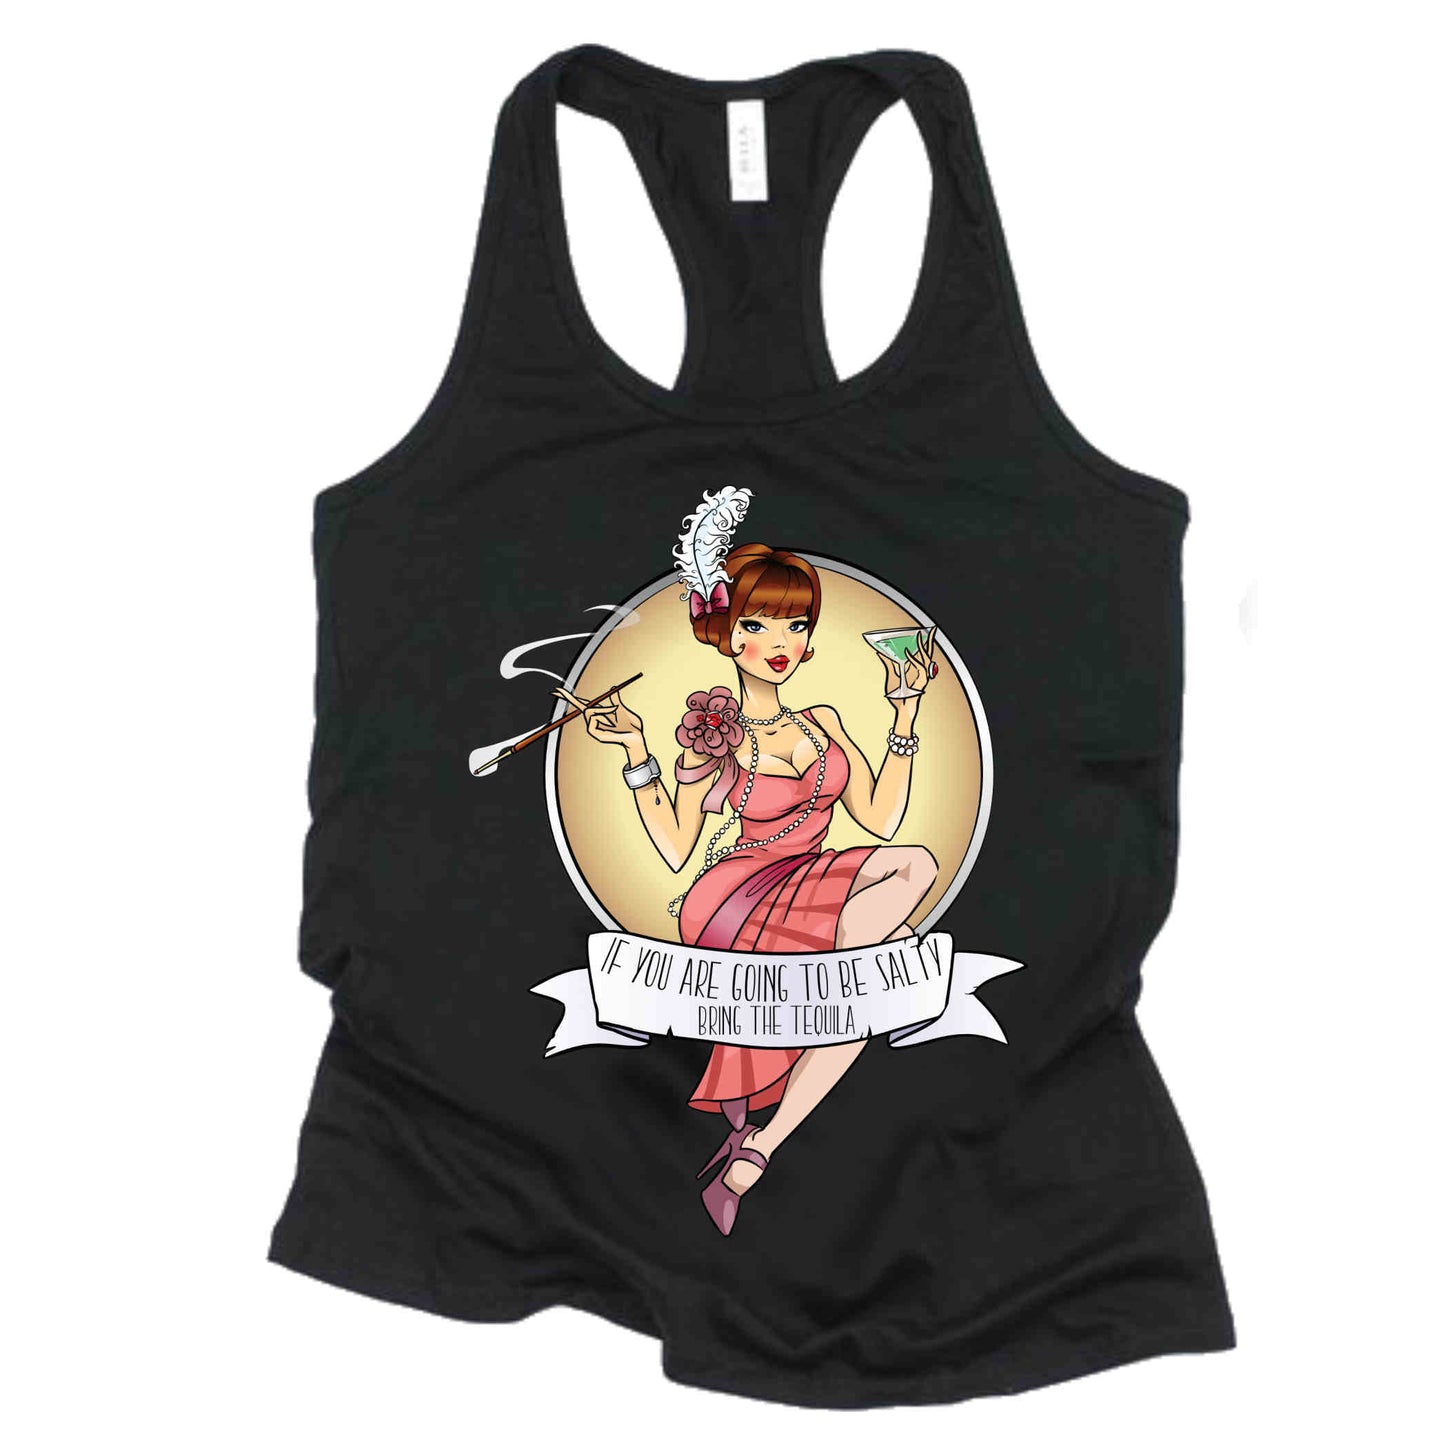 If you are going to be salty - - Racerback tanks!